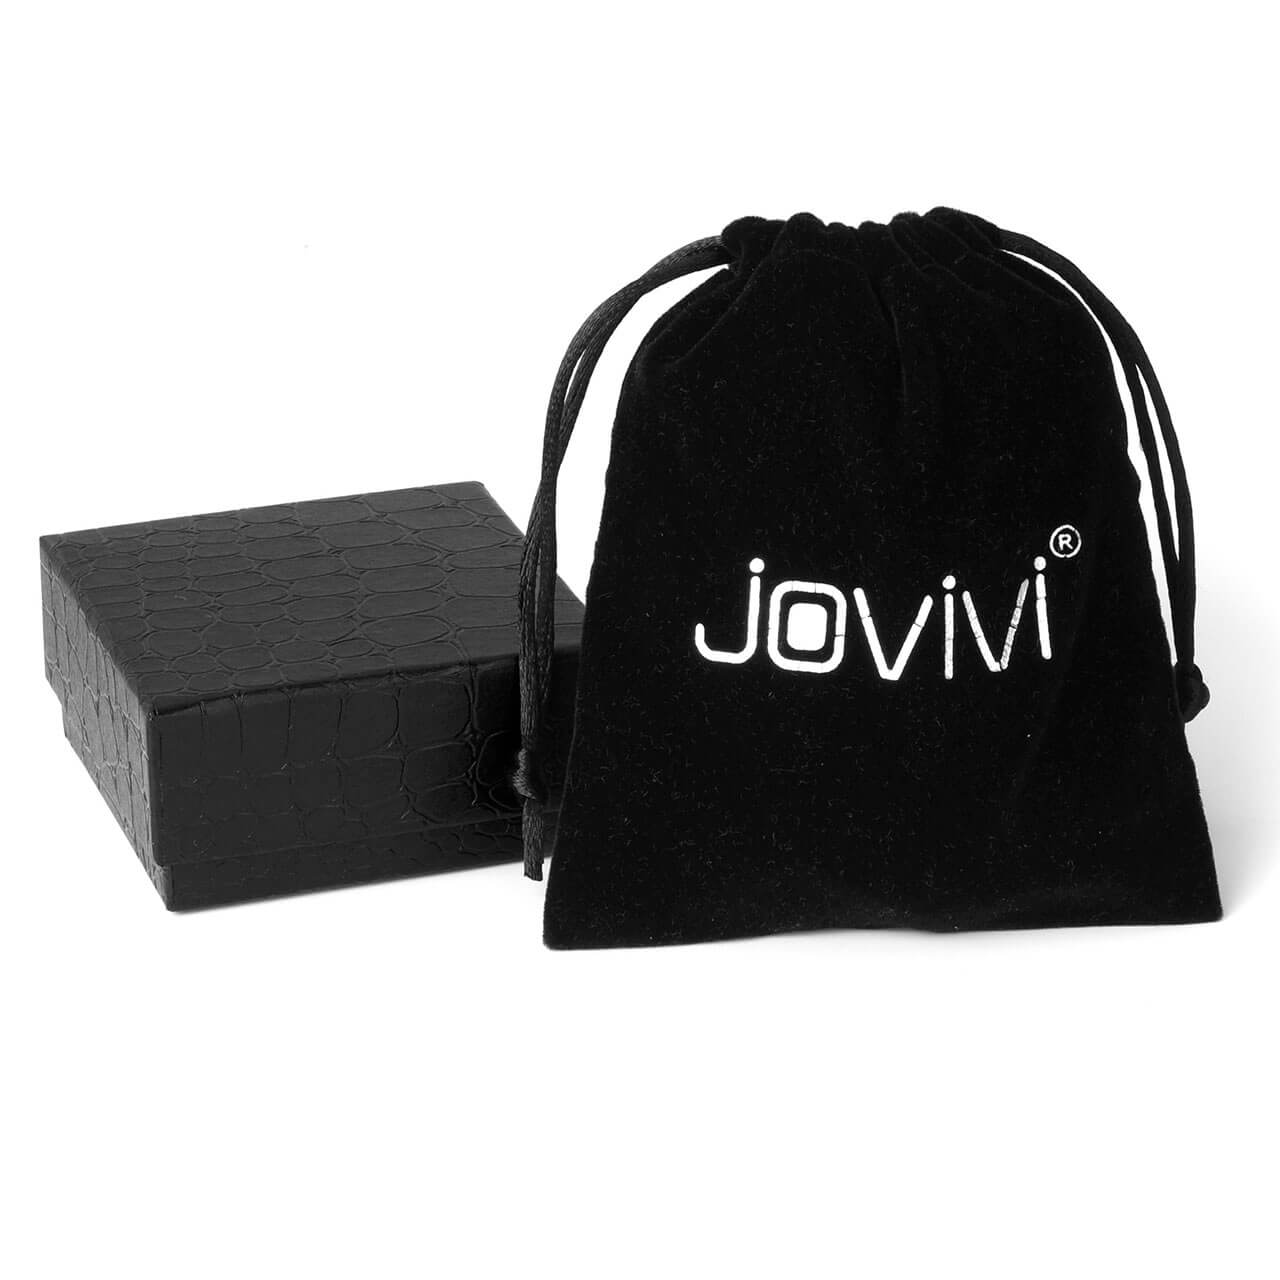 jovivi cube urn pendant necklace with black gift box, jng049301